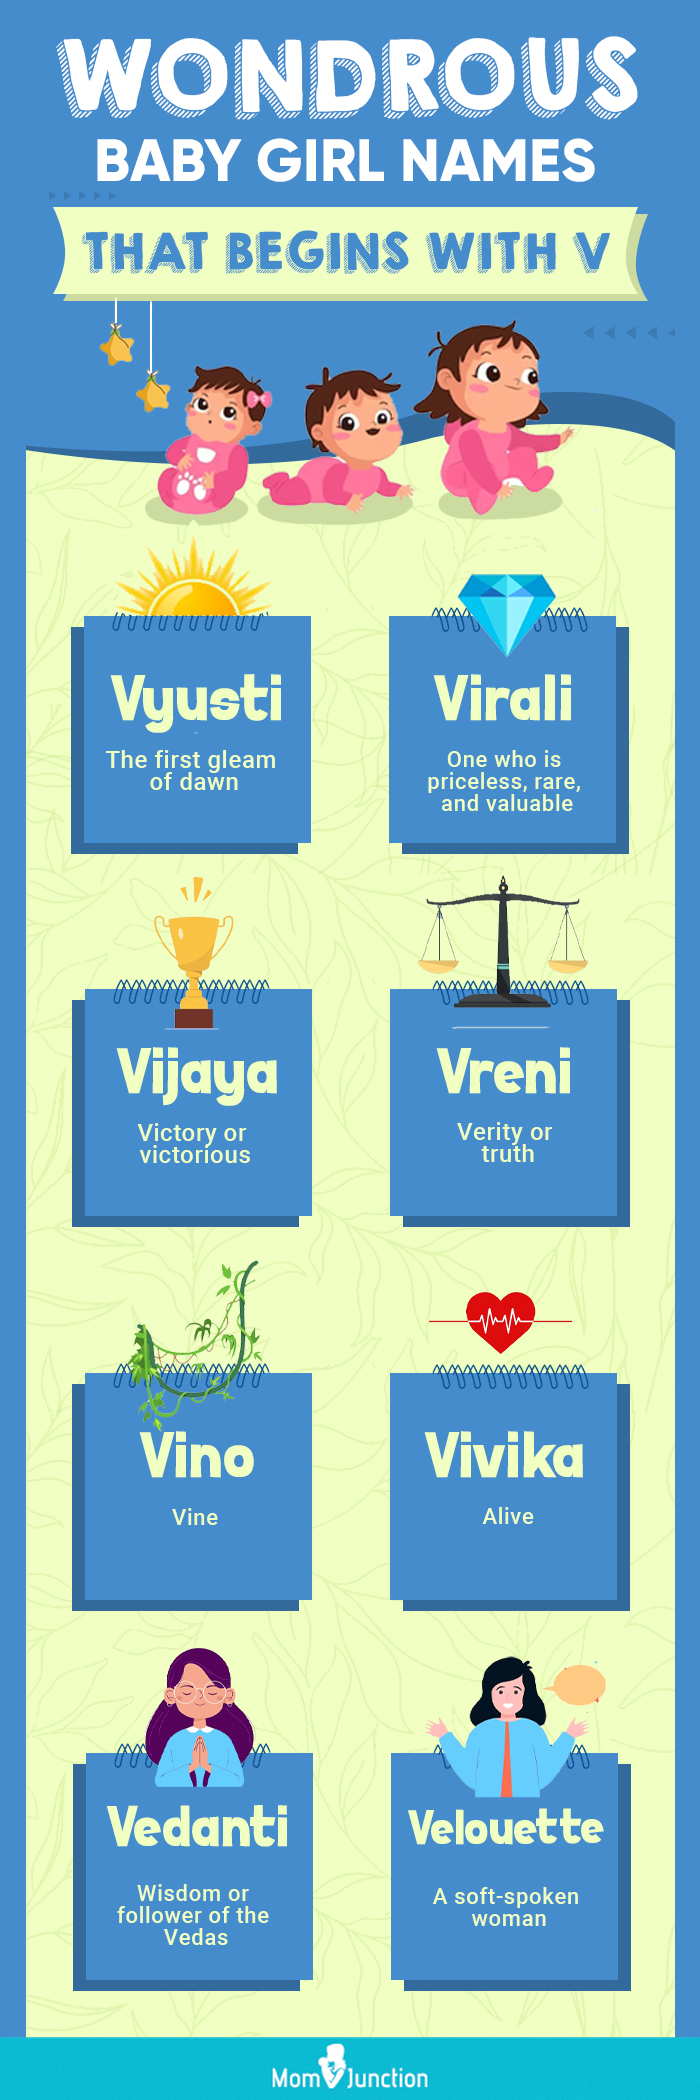 wondrous baby names that begins with v (infographic)